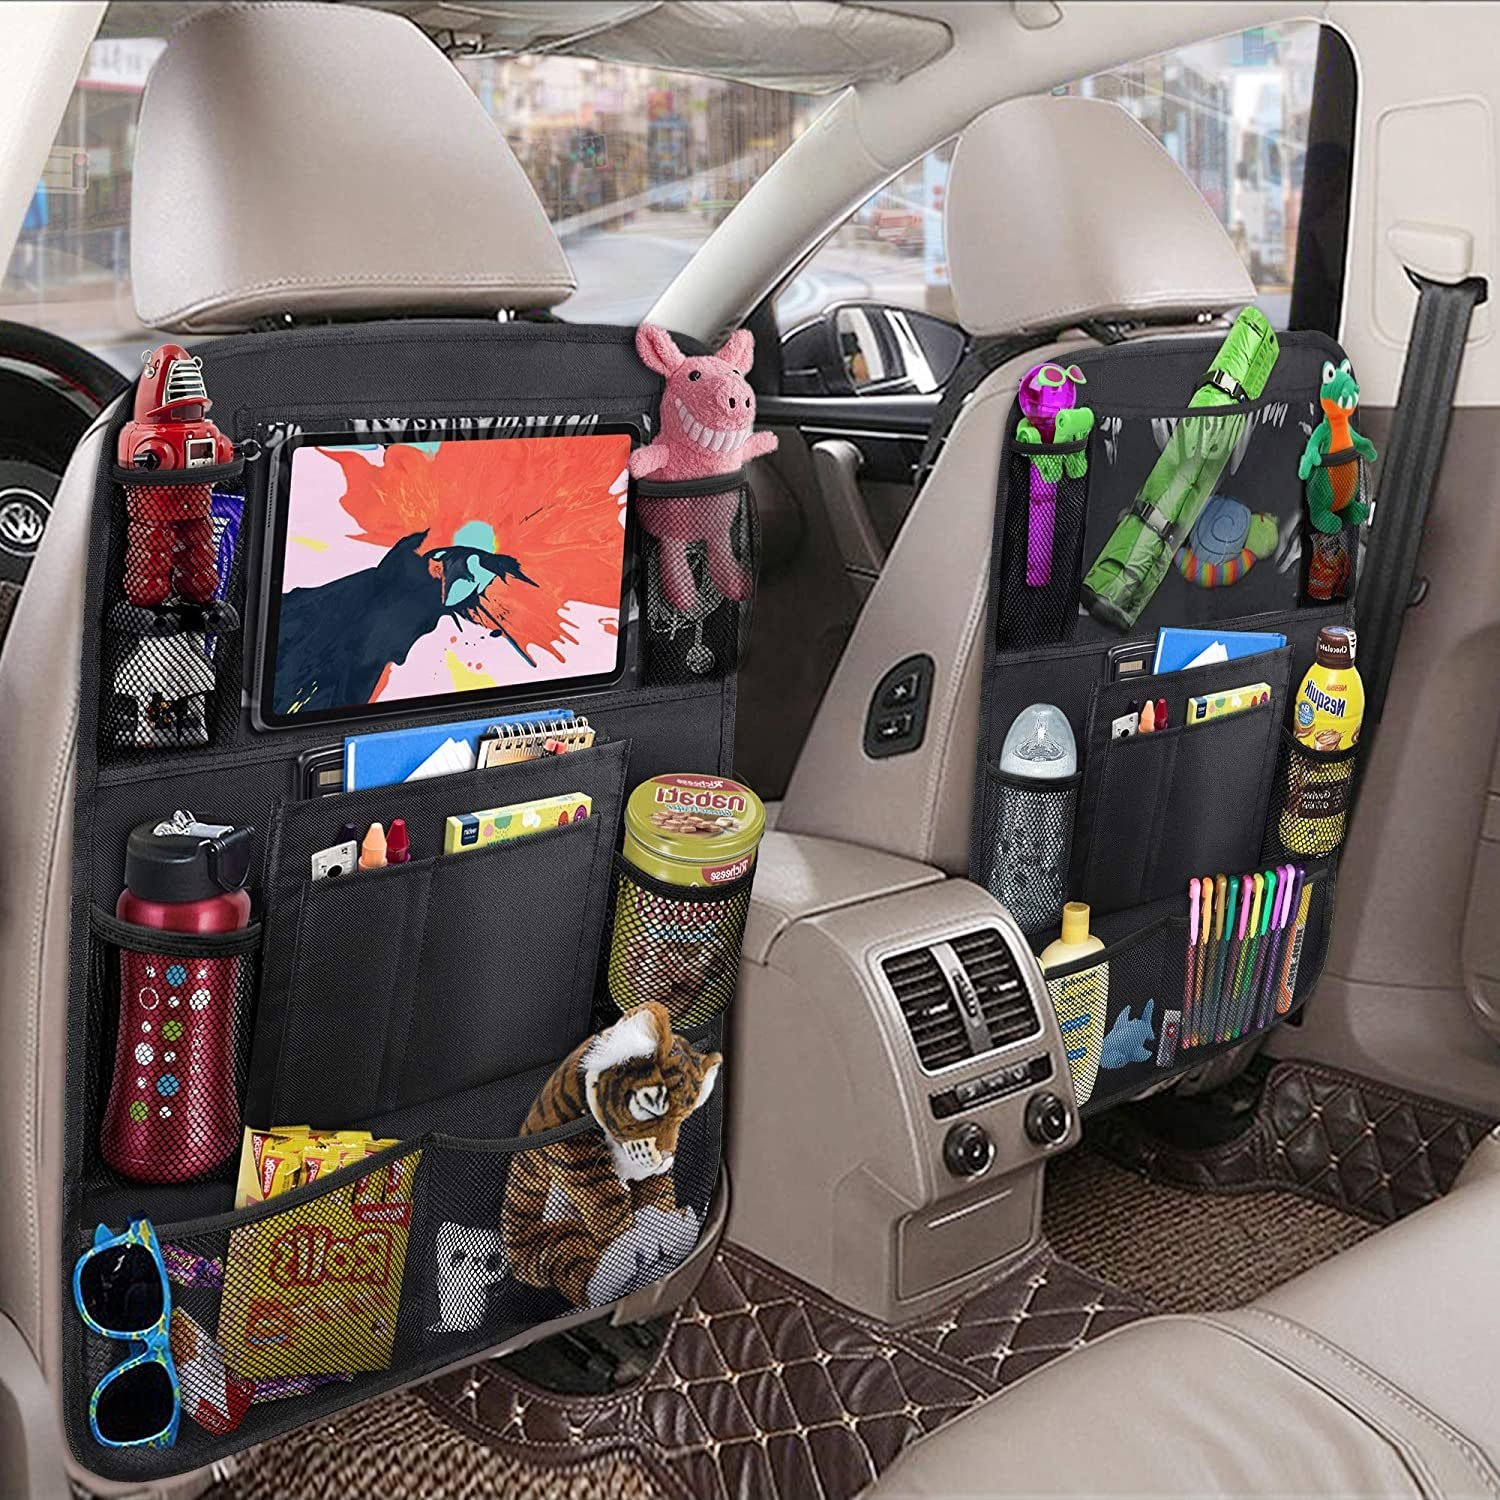 20 cool car gadgets that will totally change the way you drive